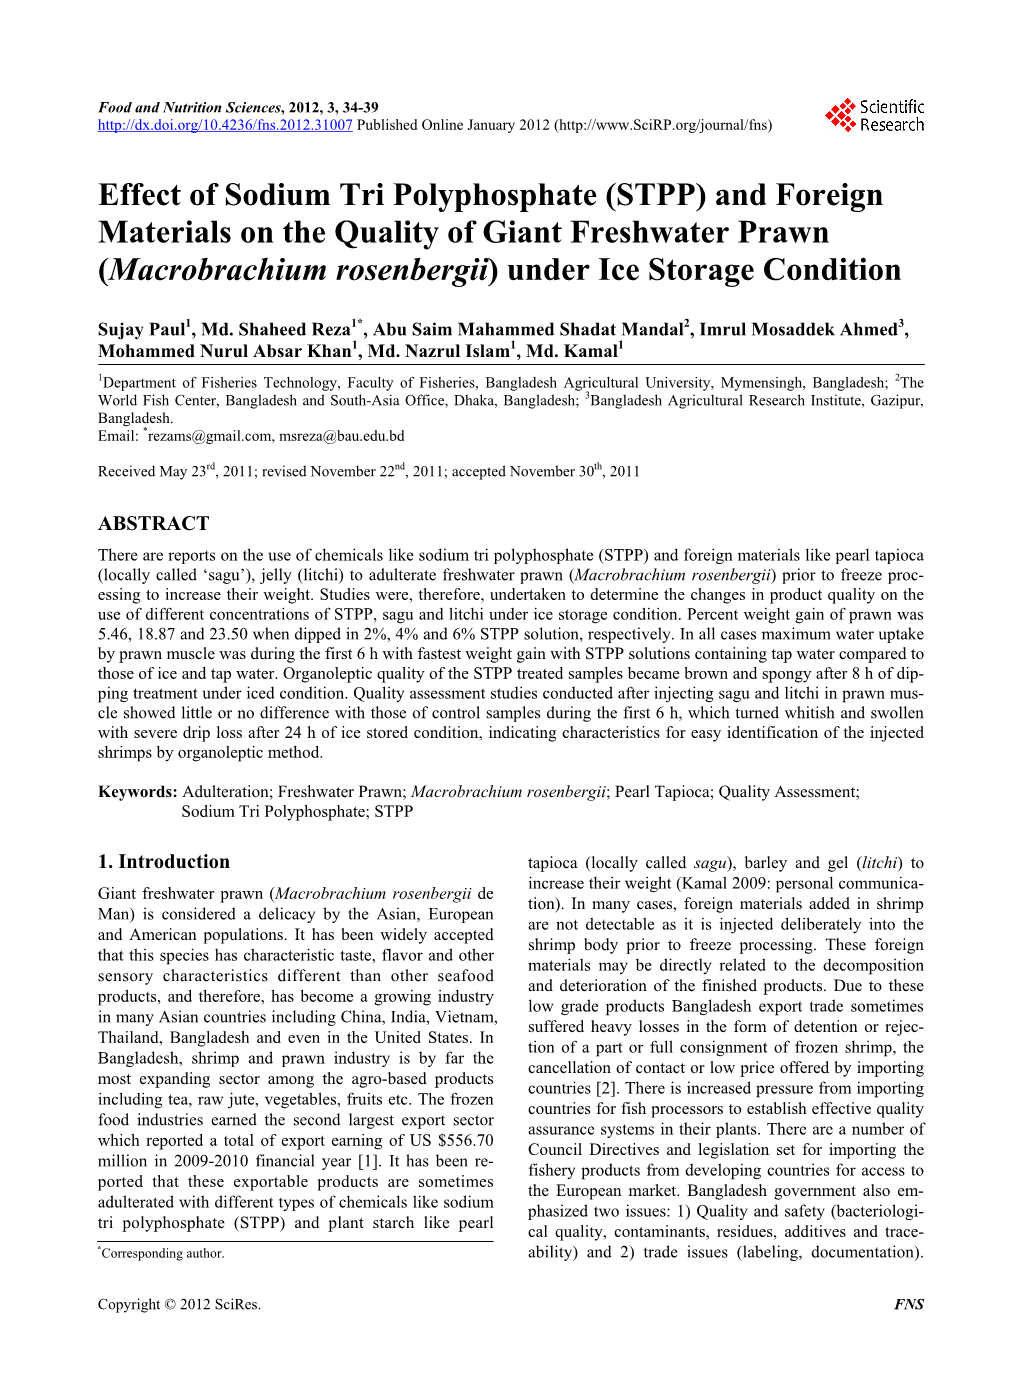 Effect of Sodium Tri Polyphosphate (STPP) and Foreign Materials on the Quality of Giant Freshwater Prawn (Macrobrachium Rosenbergii) Under Ice Storage Condition